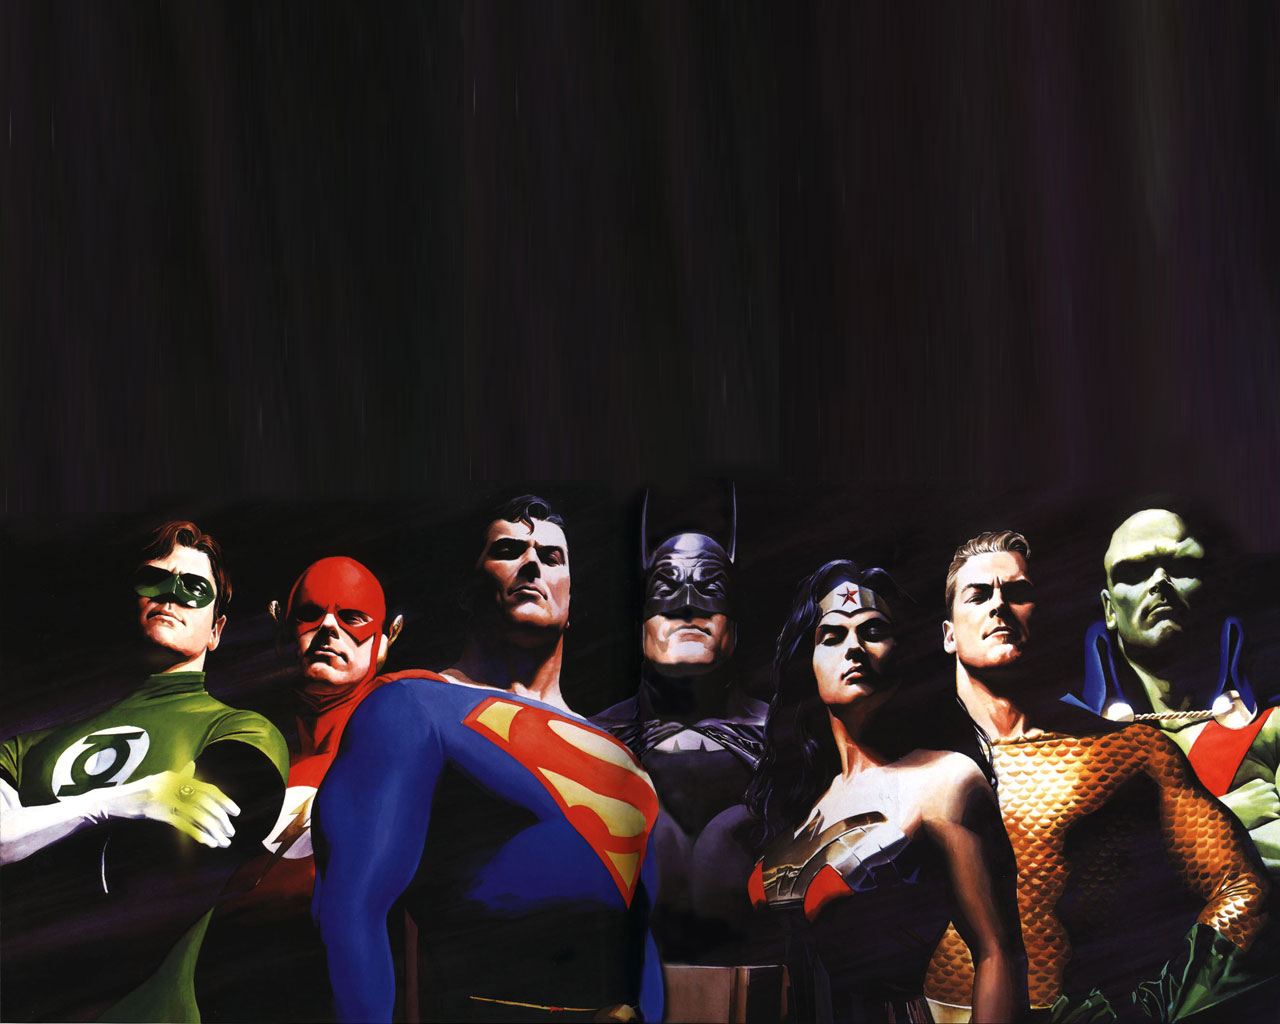 wallpaper hd justice league free wallpapers blog justice league hd